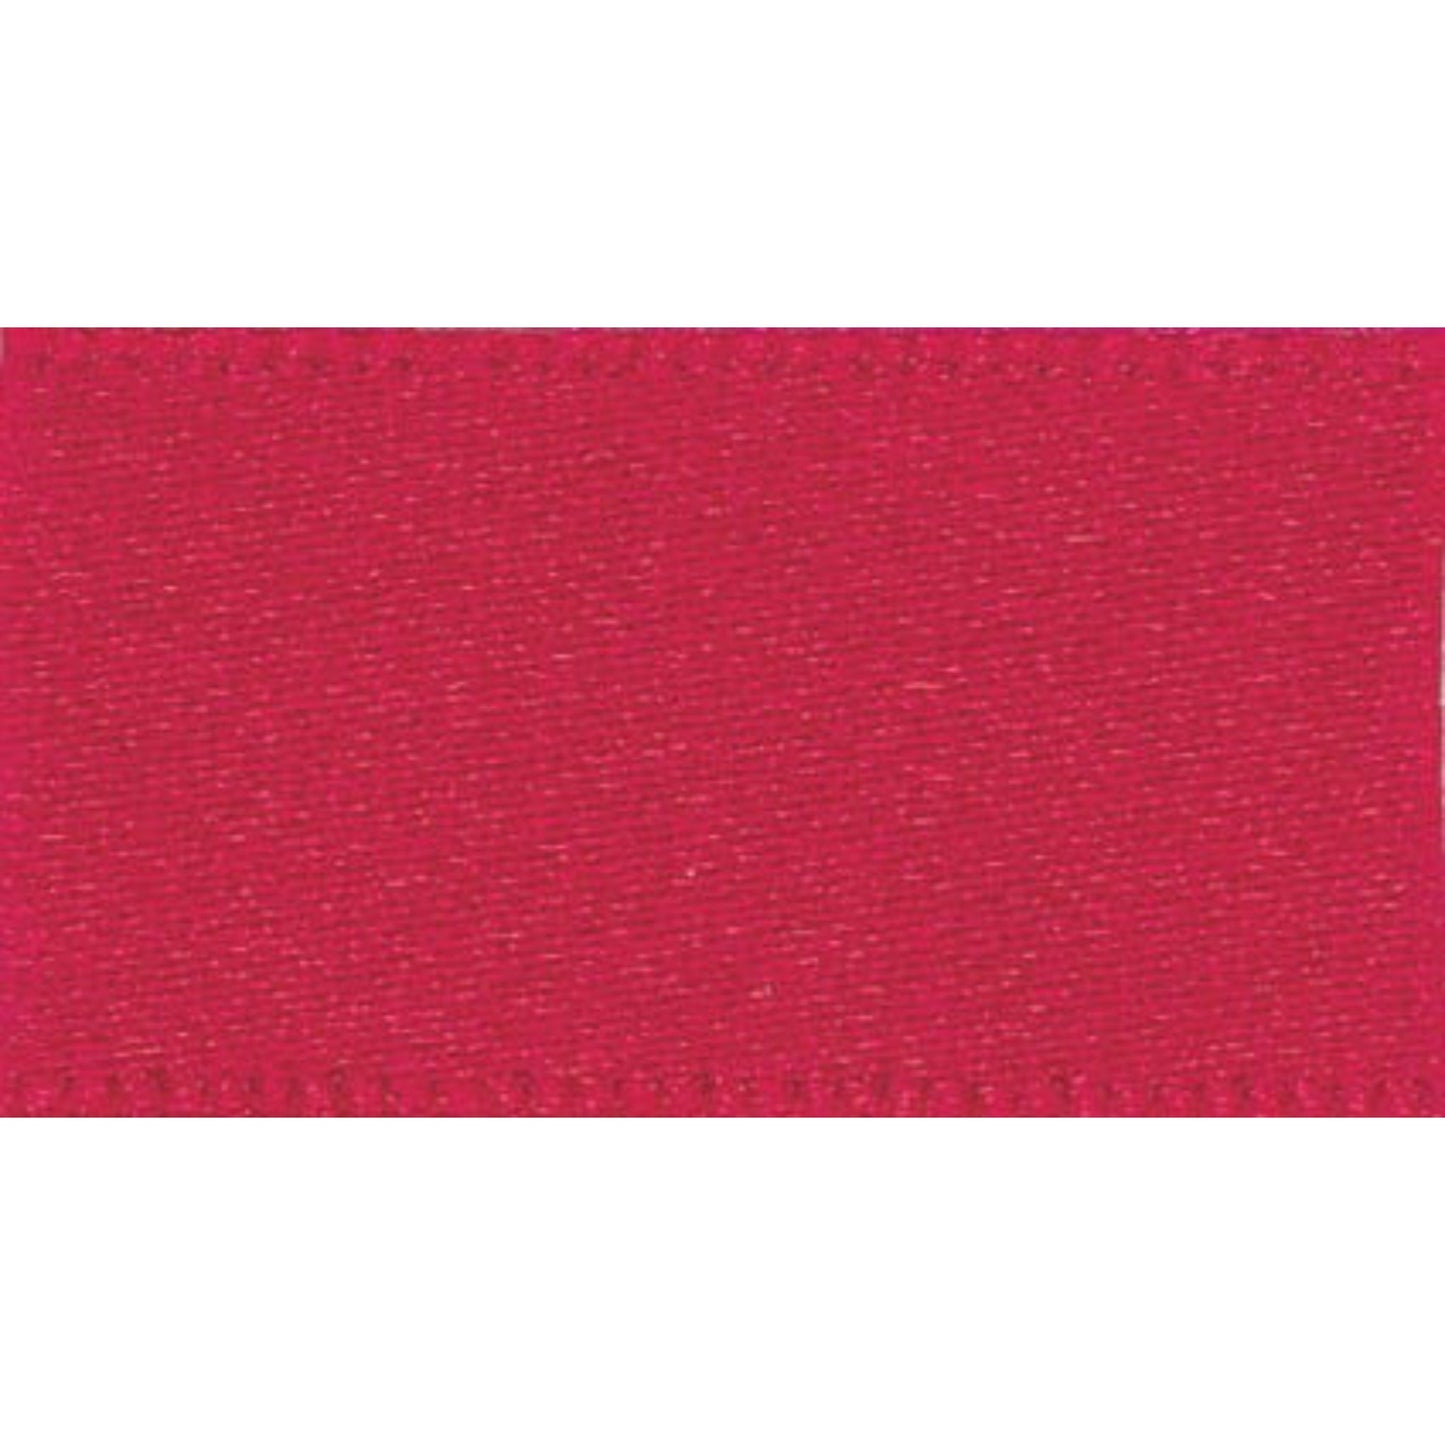 Double Faced Satin Ribbon: Red: 15mm Wide. Price per metre.